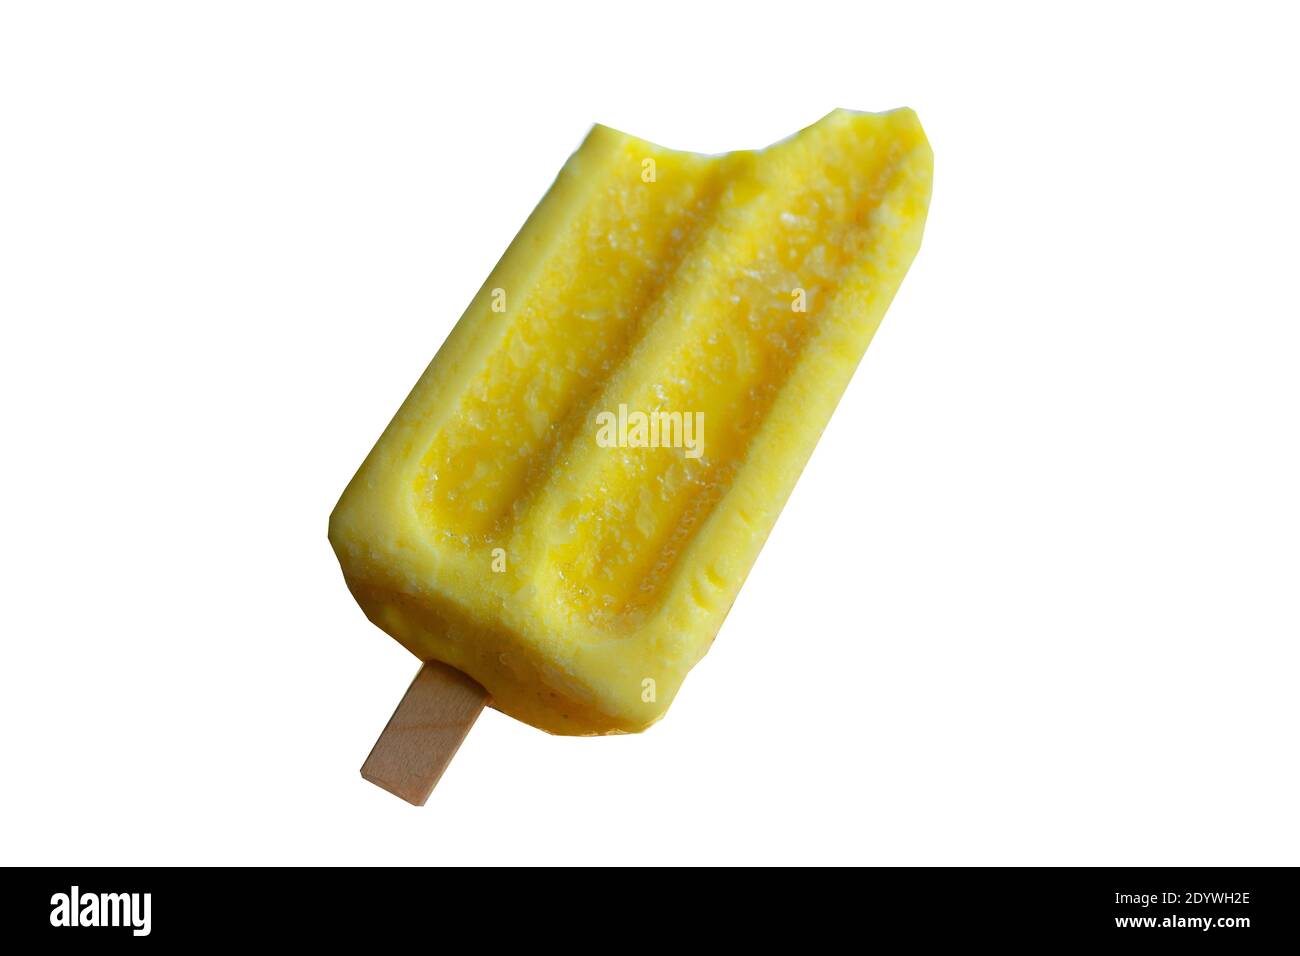 People are eating fruit flavored ice cream. Stock Photo